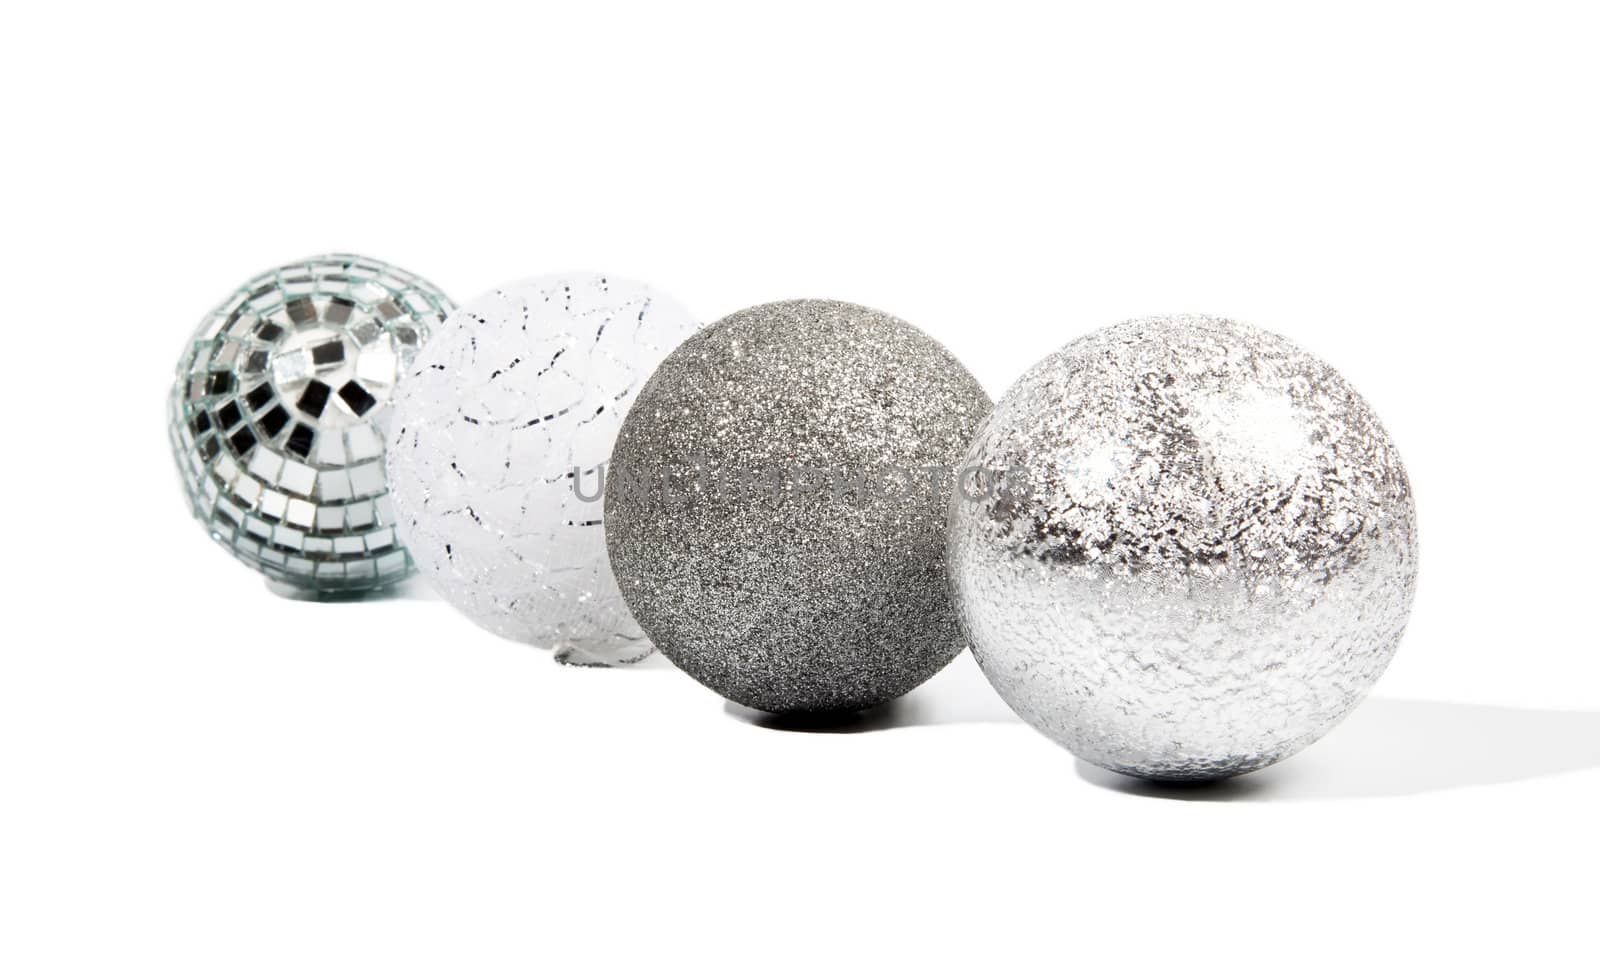 Four Christmas silver balls by RawGroup